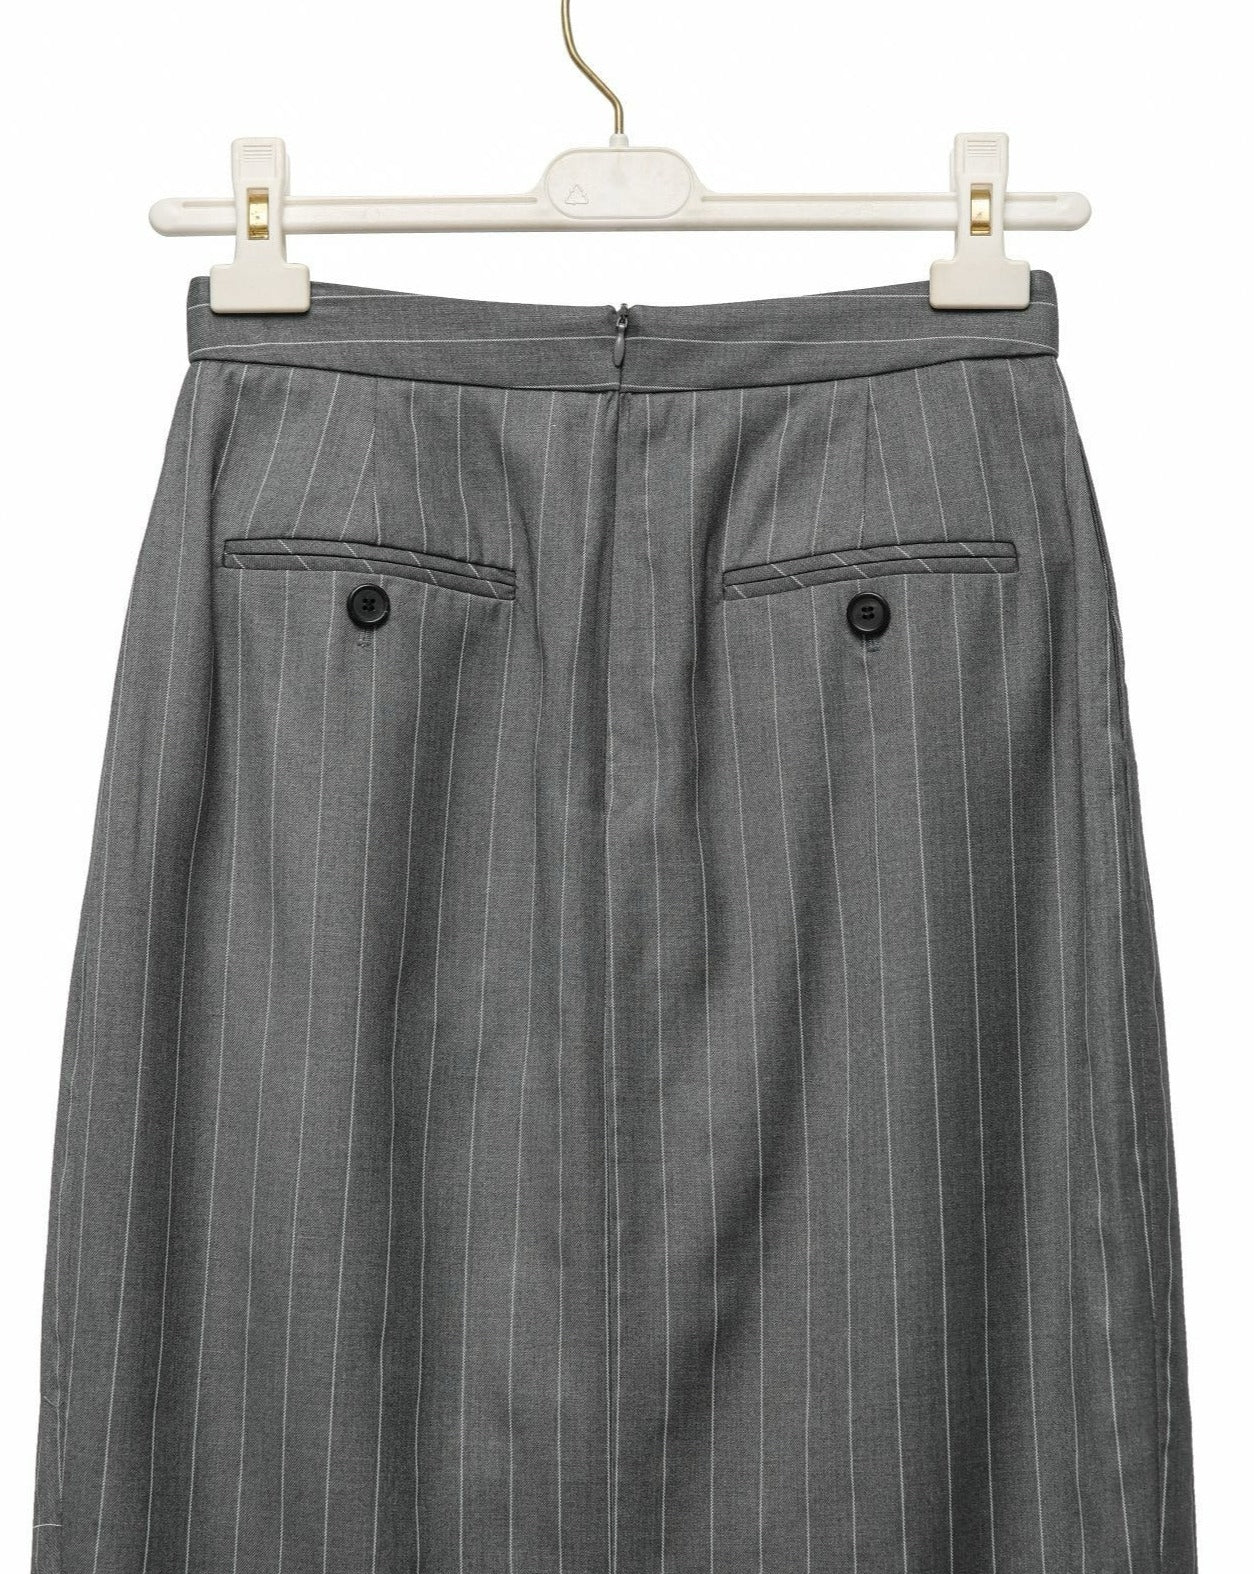 【PAPERMOON ペーパームーン】SS / Wide Pin Stripe Set Up Suit Pencil Midi Skirt